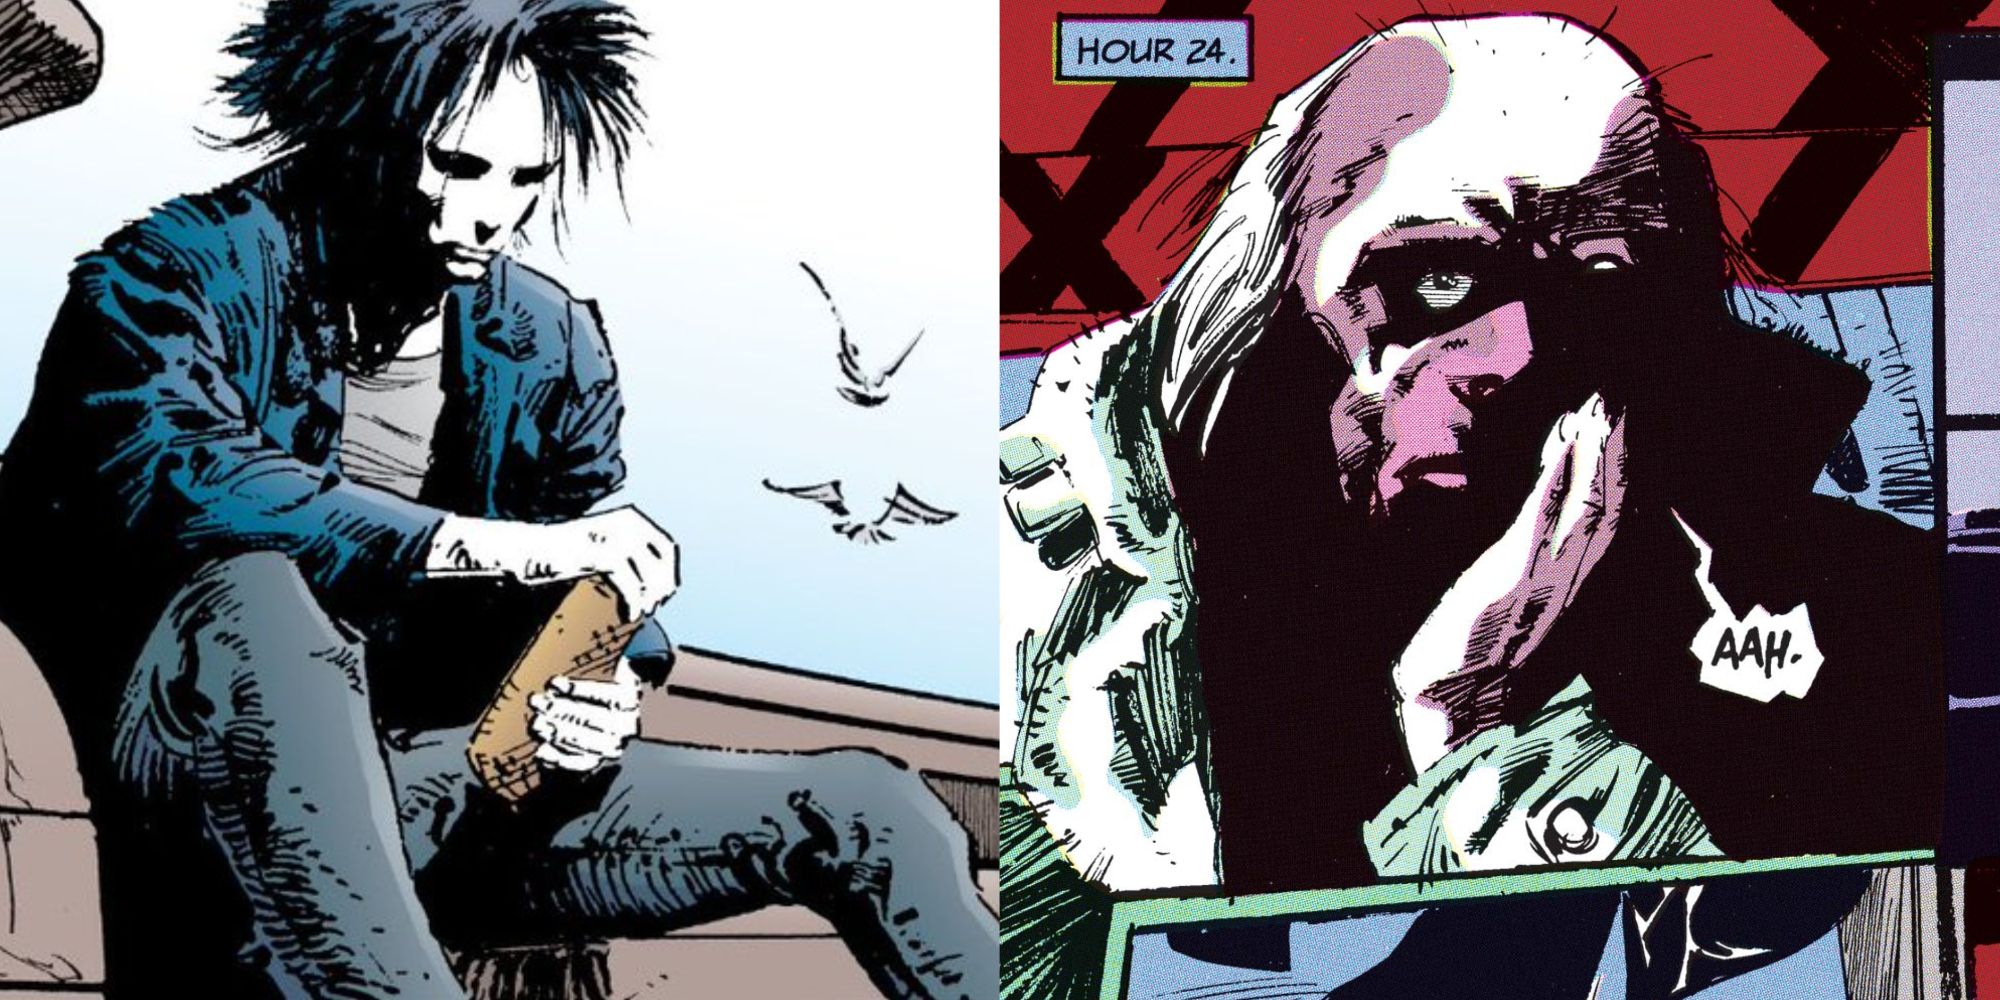 A split image showing haracters from The Sandman